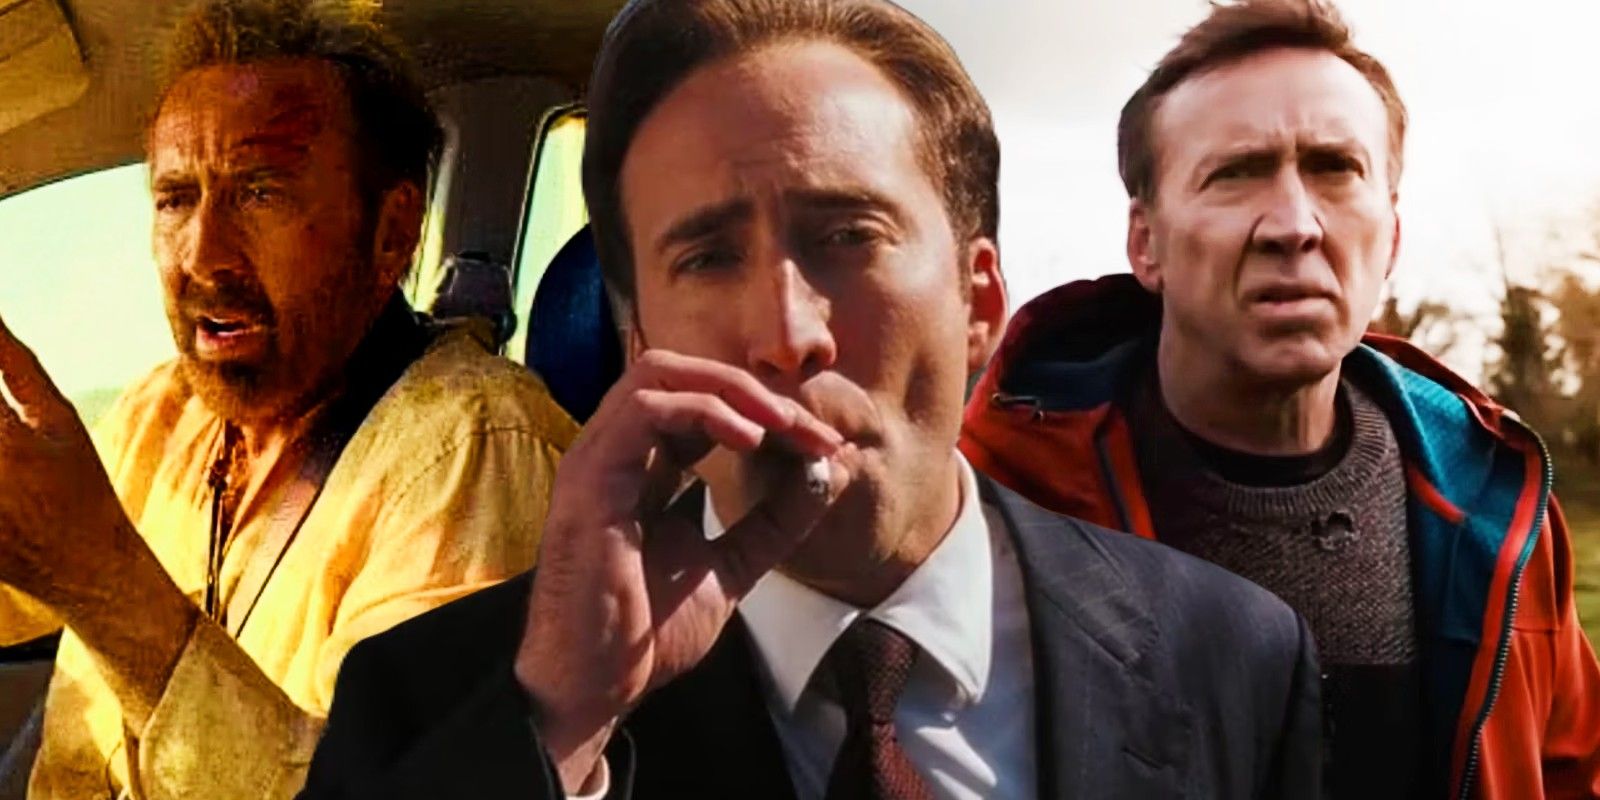 Blended image of Nicolas Cage in The Surfer, Lord of War, and Arcadian